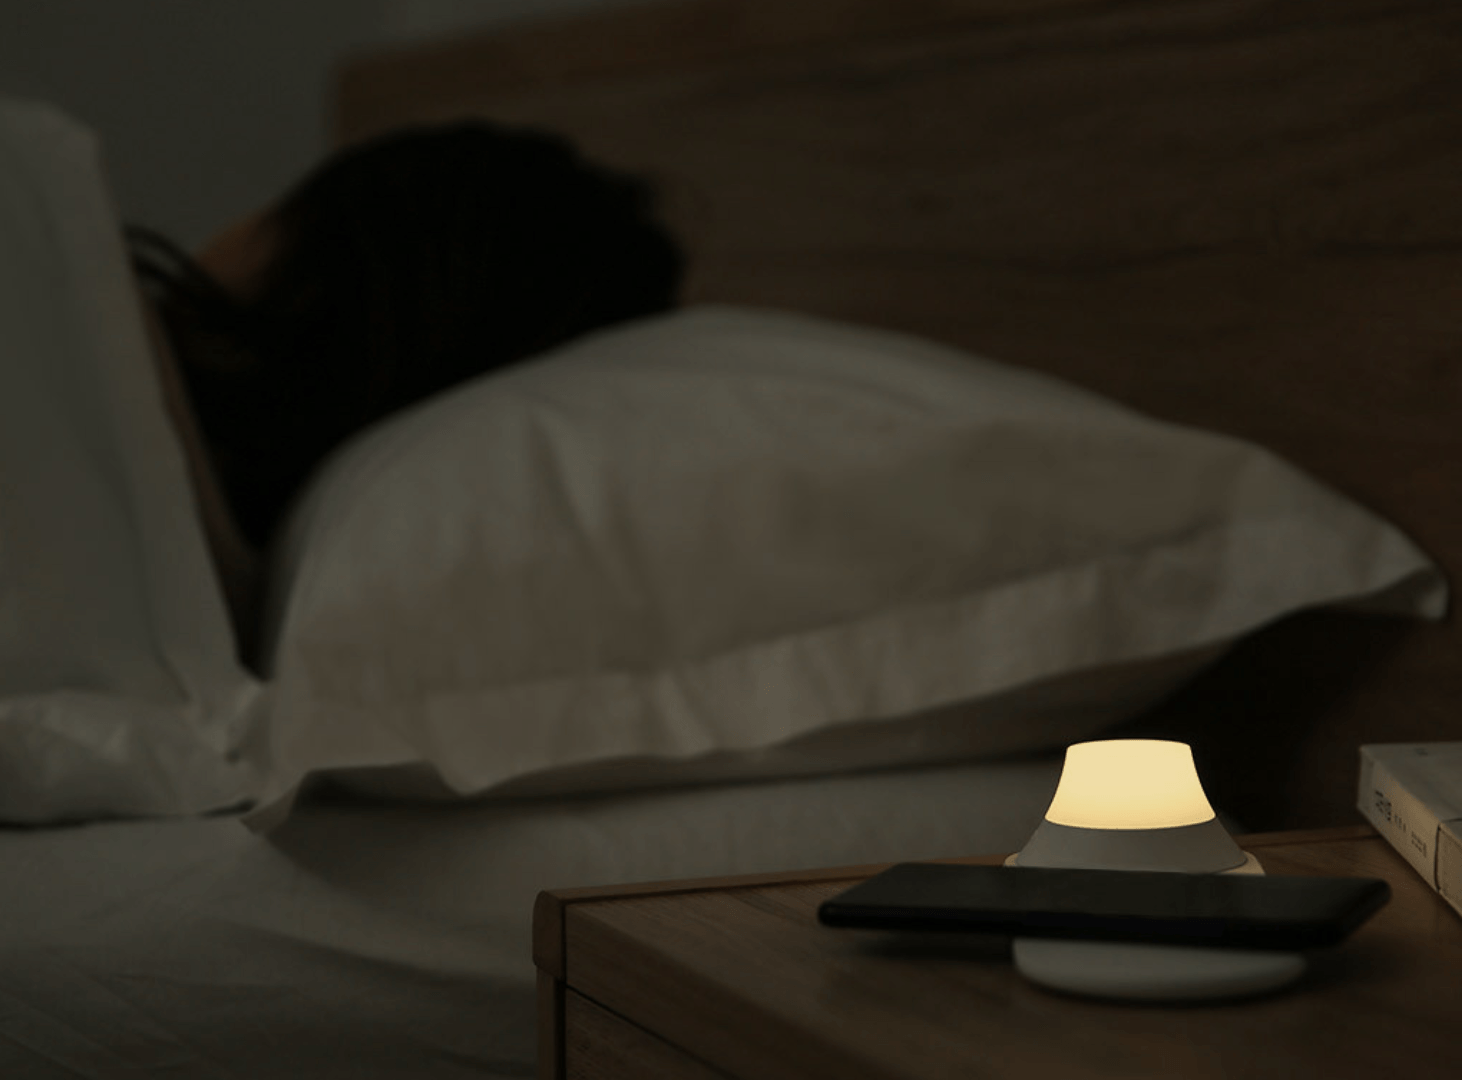 Yeelight induction charger with built-in night lamp